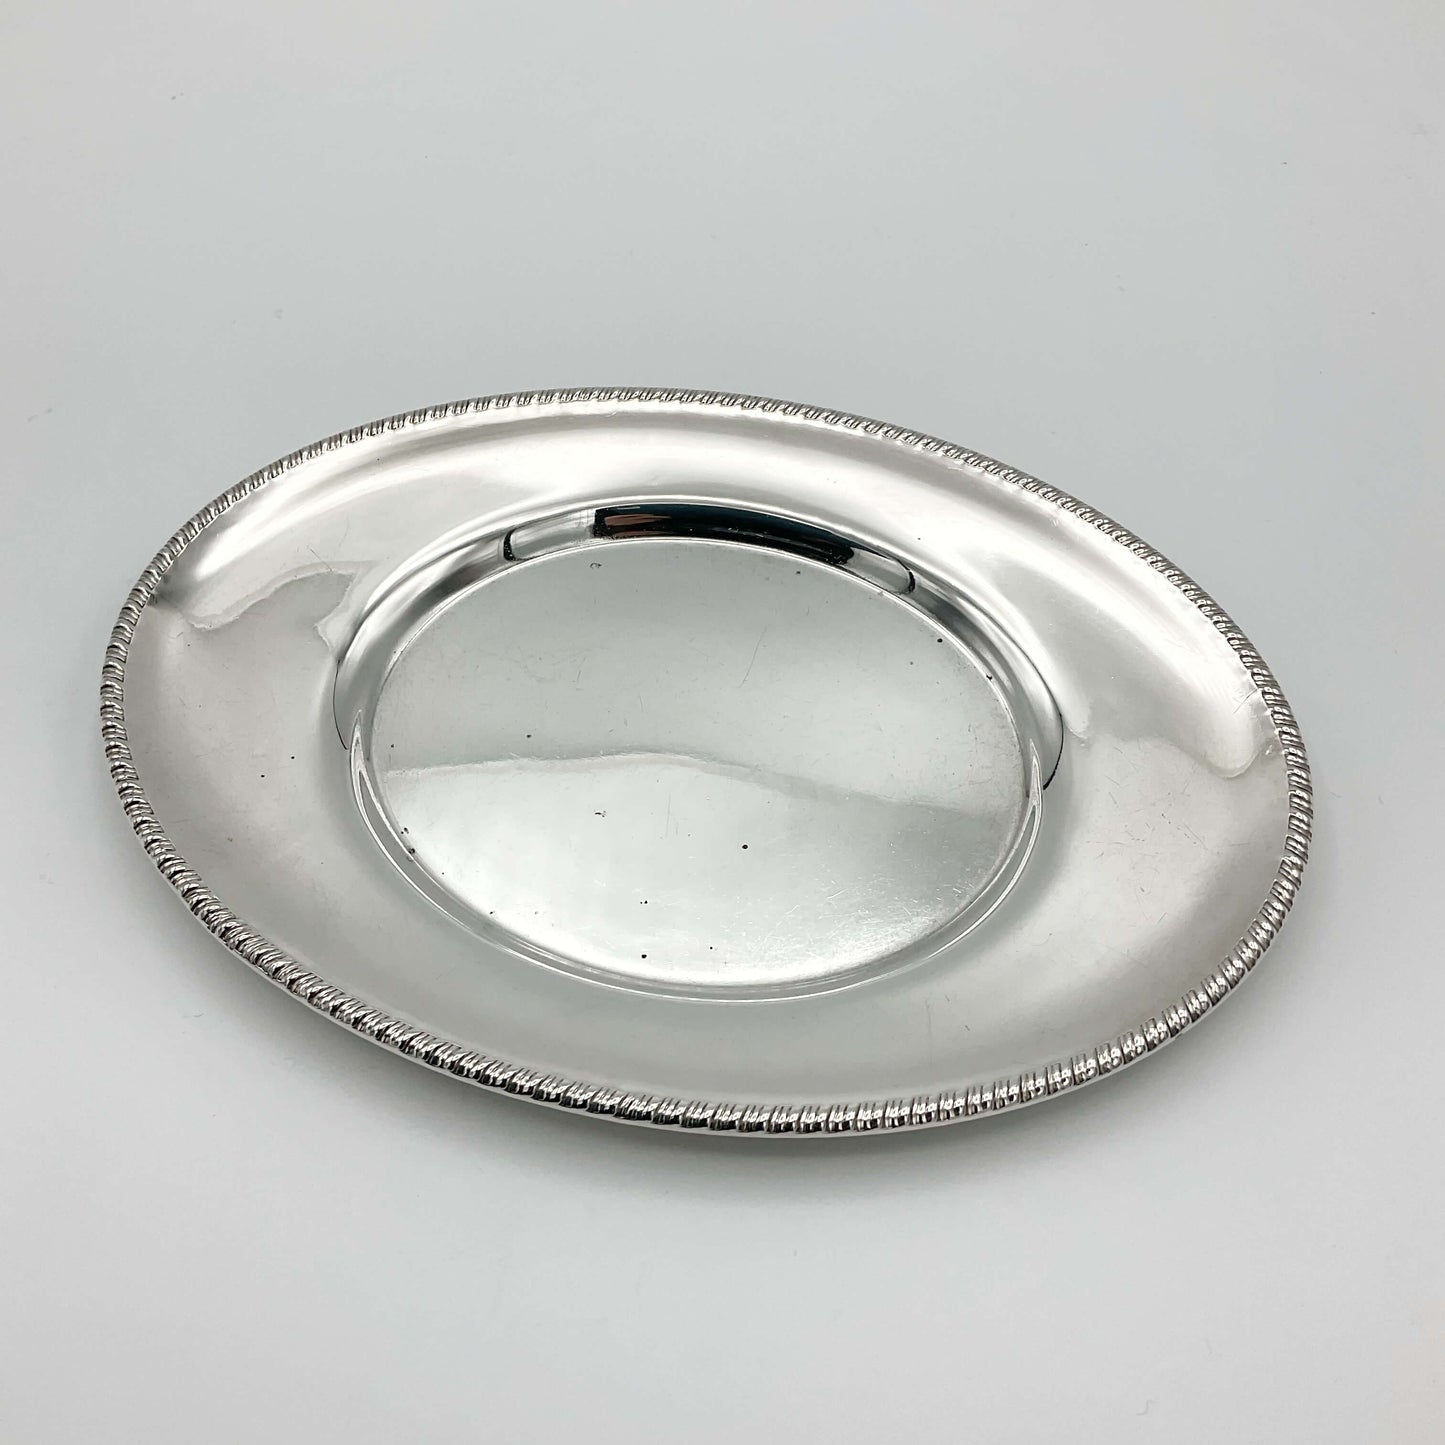 A beautiful shiny silver plated serving tray or platter showing a pretty rope design rim on a white background